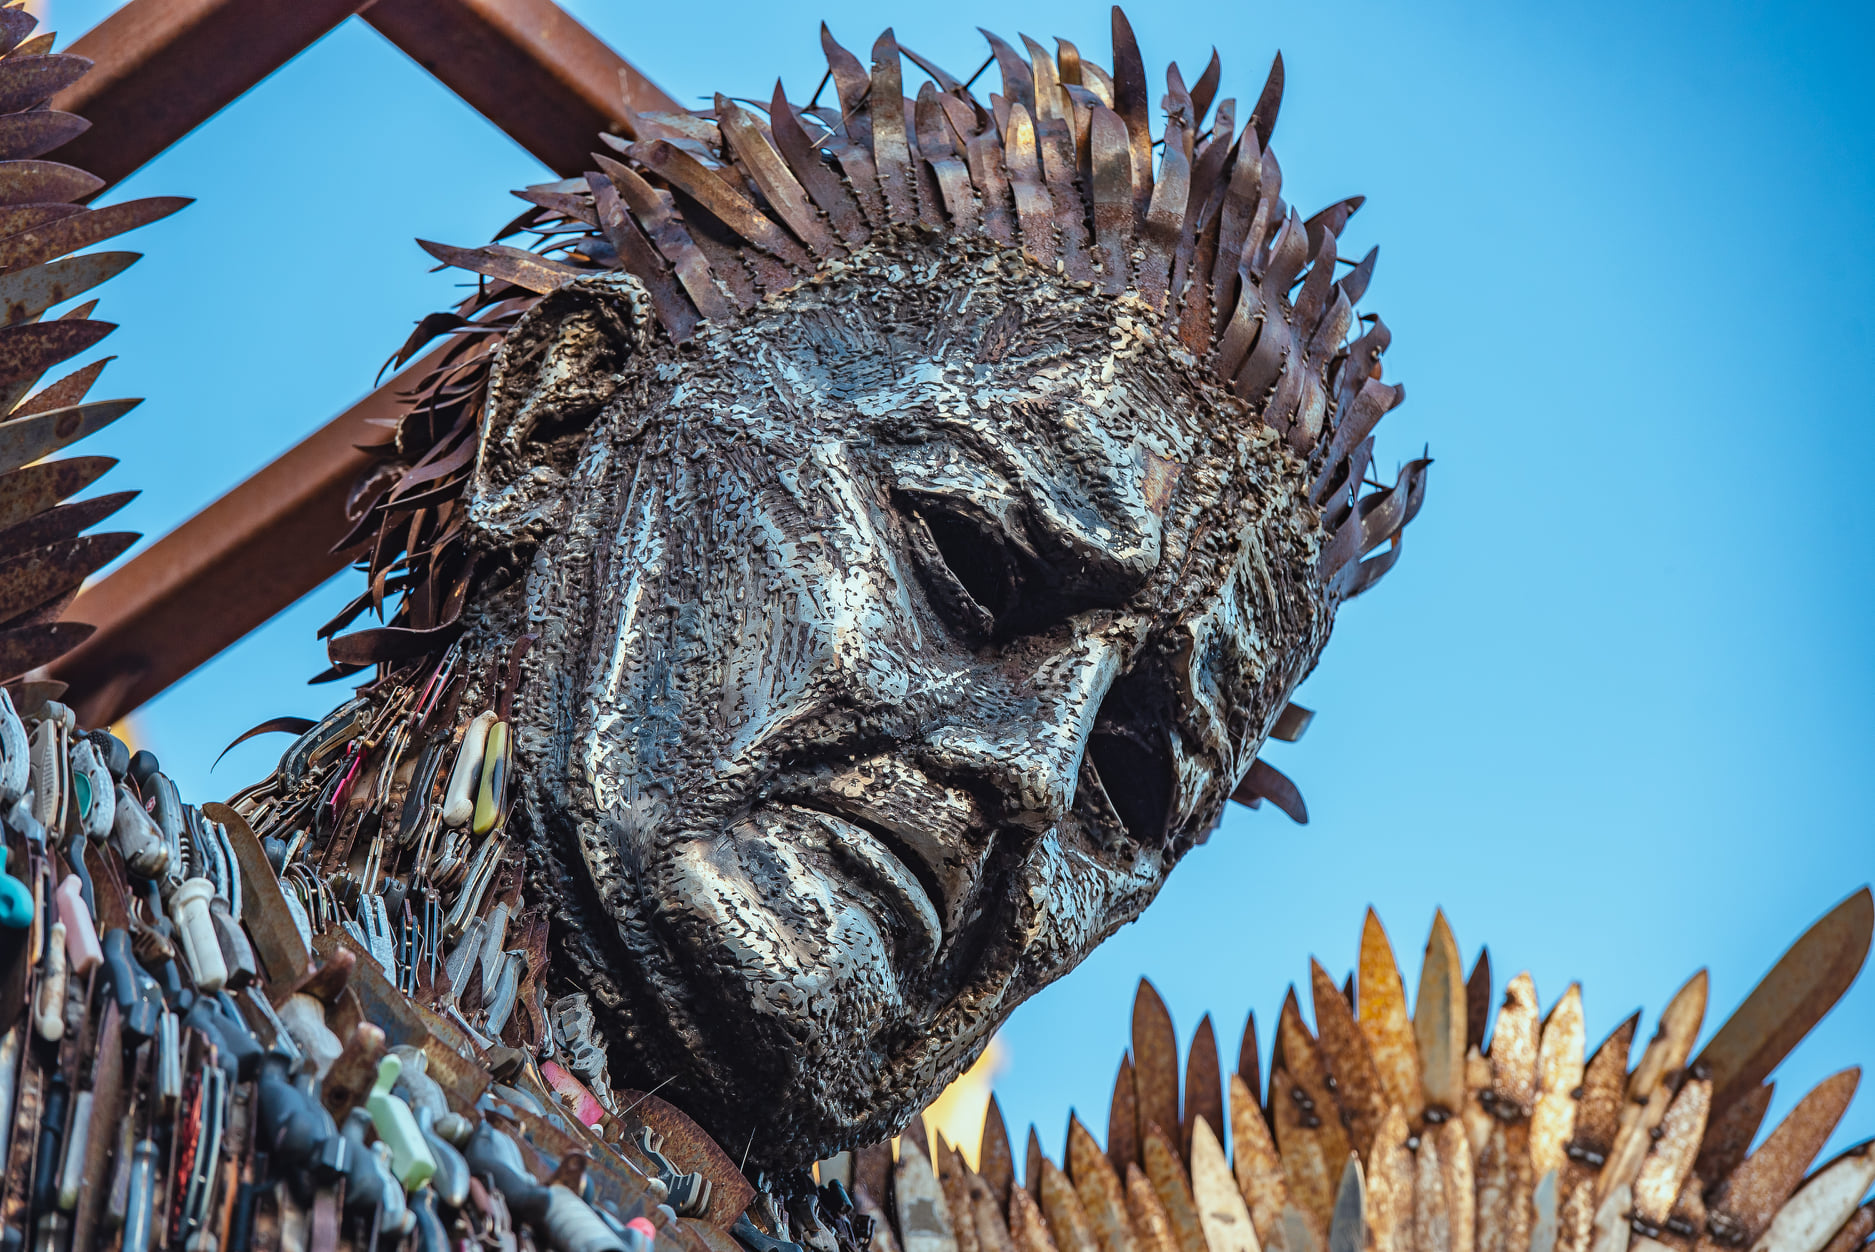 NEWS | The Knife Angel has arrived in Worcester and will remain there for the rest of March